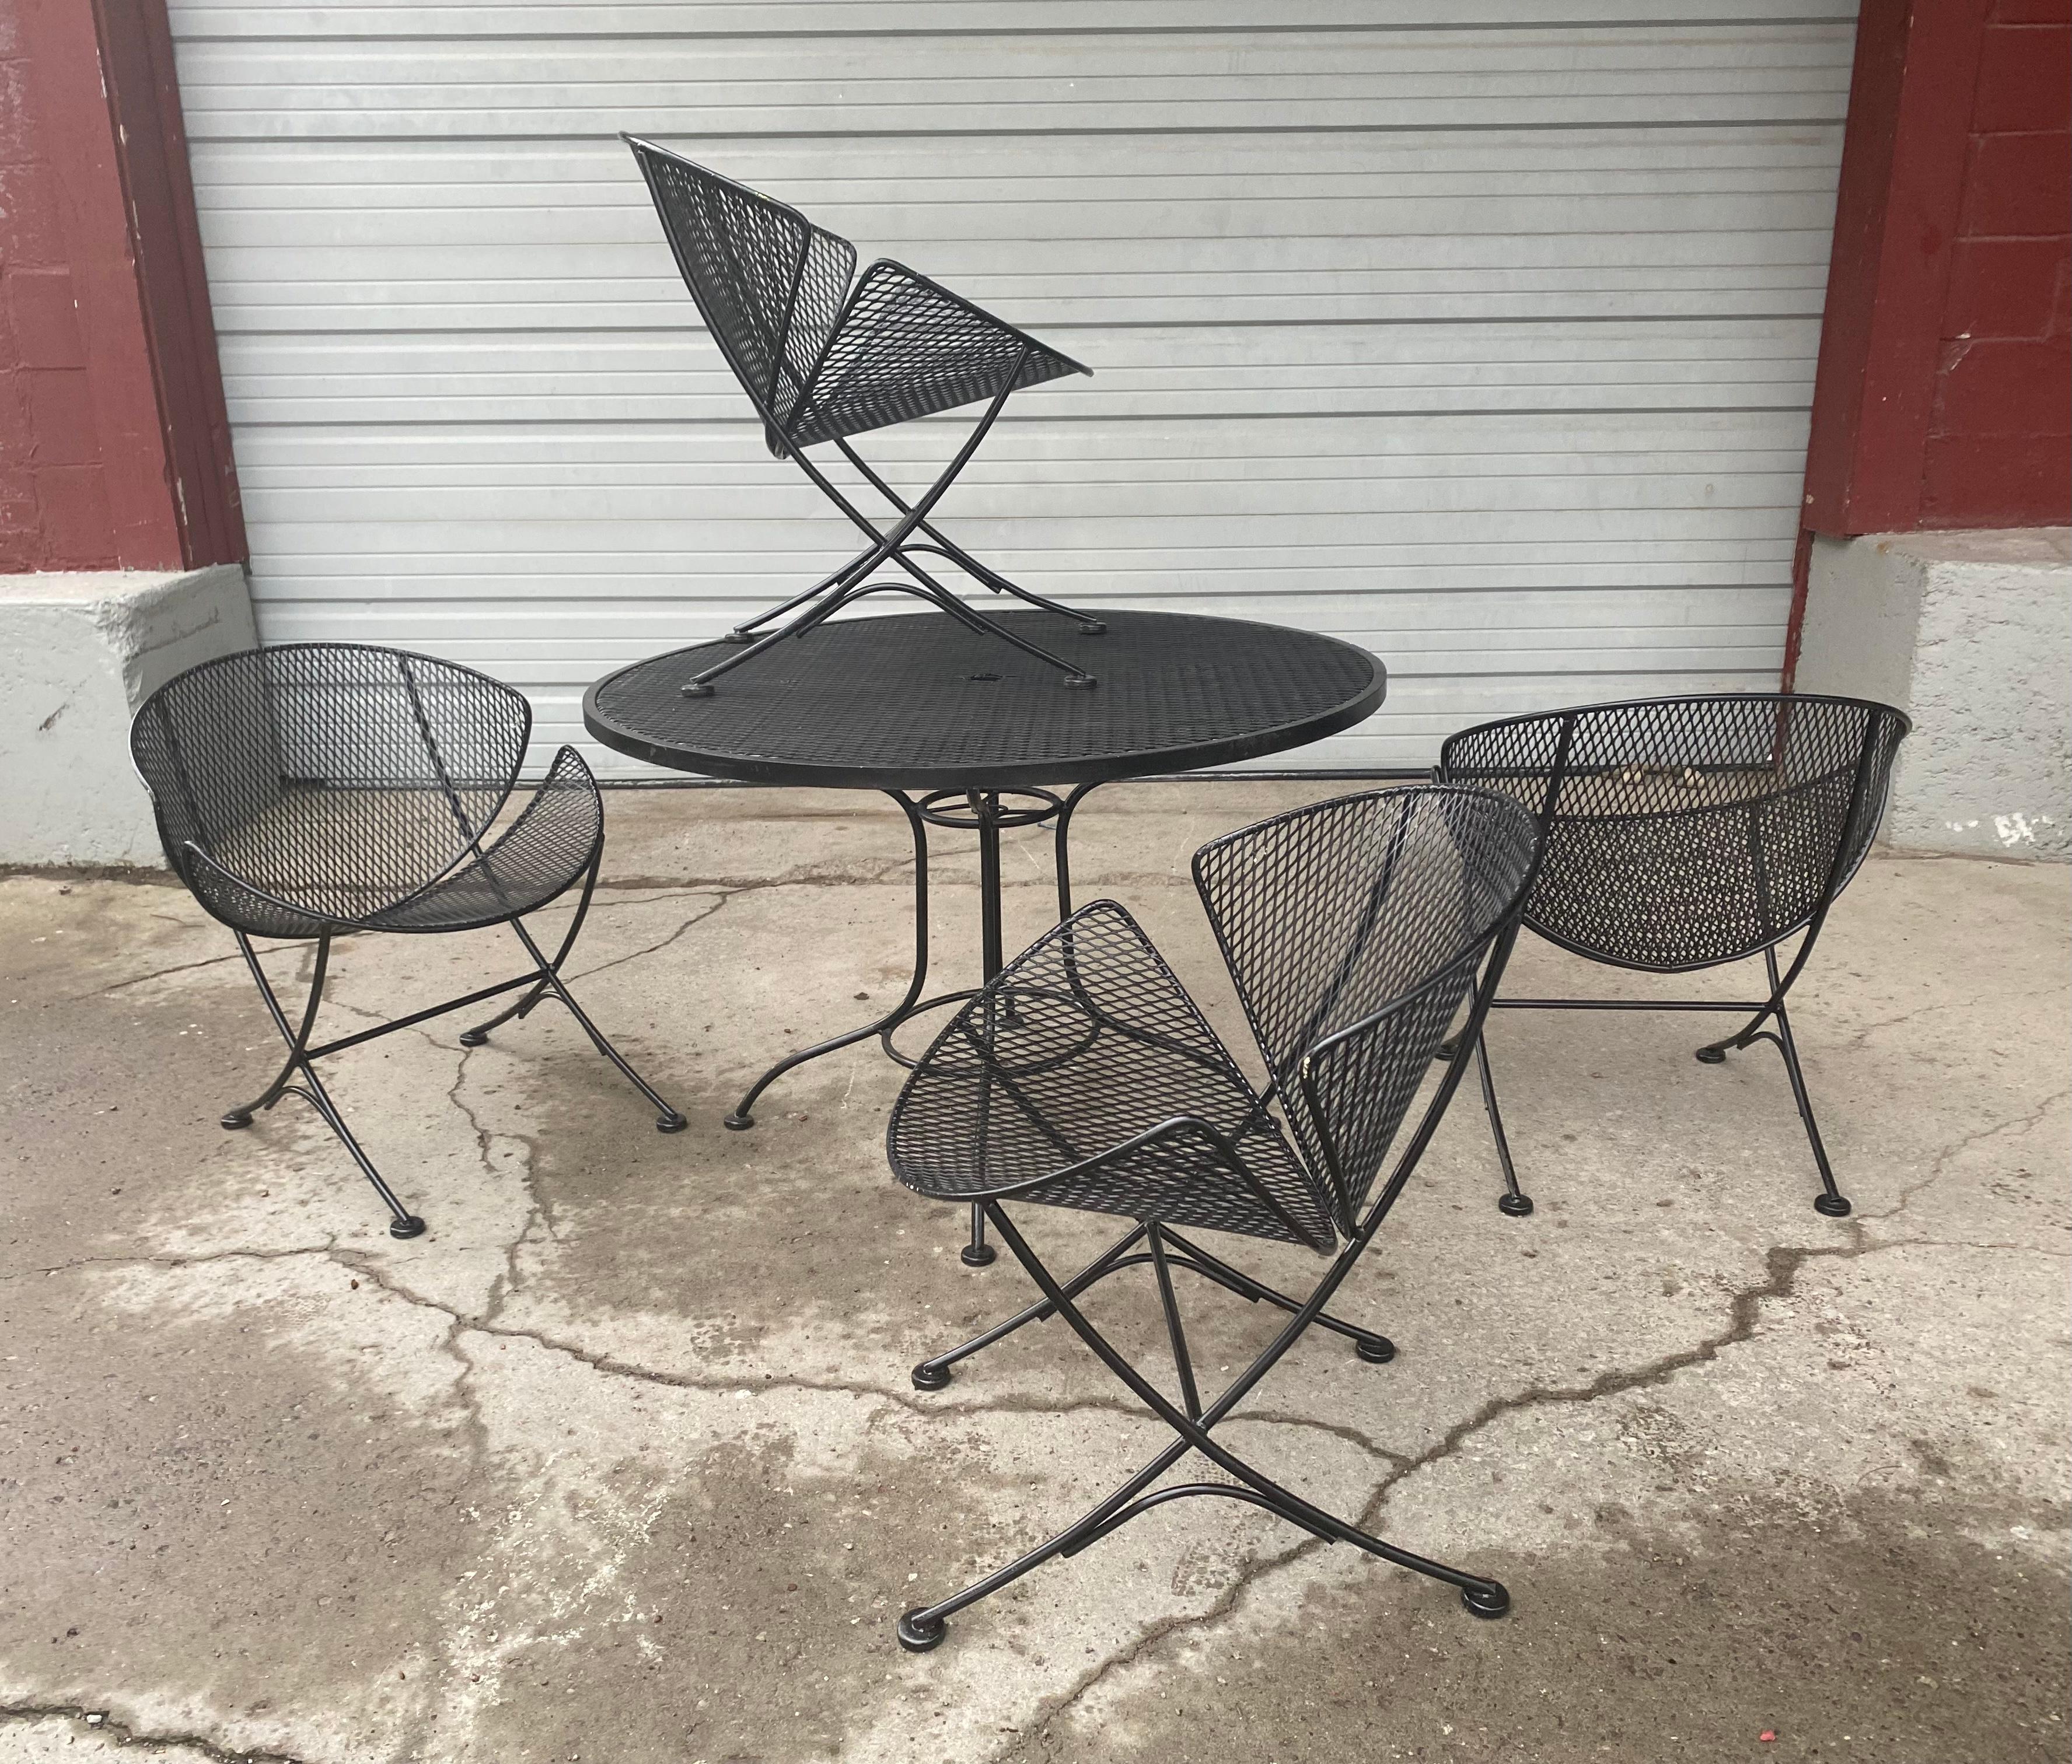 Classic Mid-Century Modern wrought iron patio / garden set, Dinette, designed by Maurizio Tempestini for Salterini. Set includes 4 matching Clam Shell chairs and Table, Dimensions Chairs: H 26.5 in. W 22.5 in. D 24 in., Table: H 26 in. Diameter 41 i